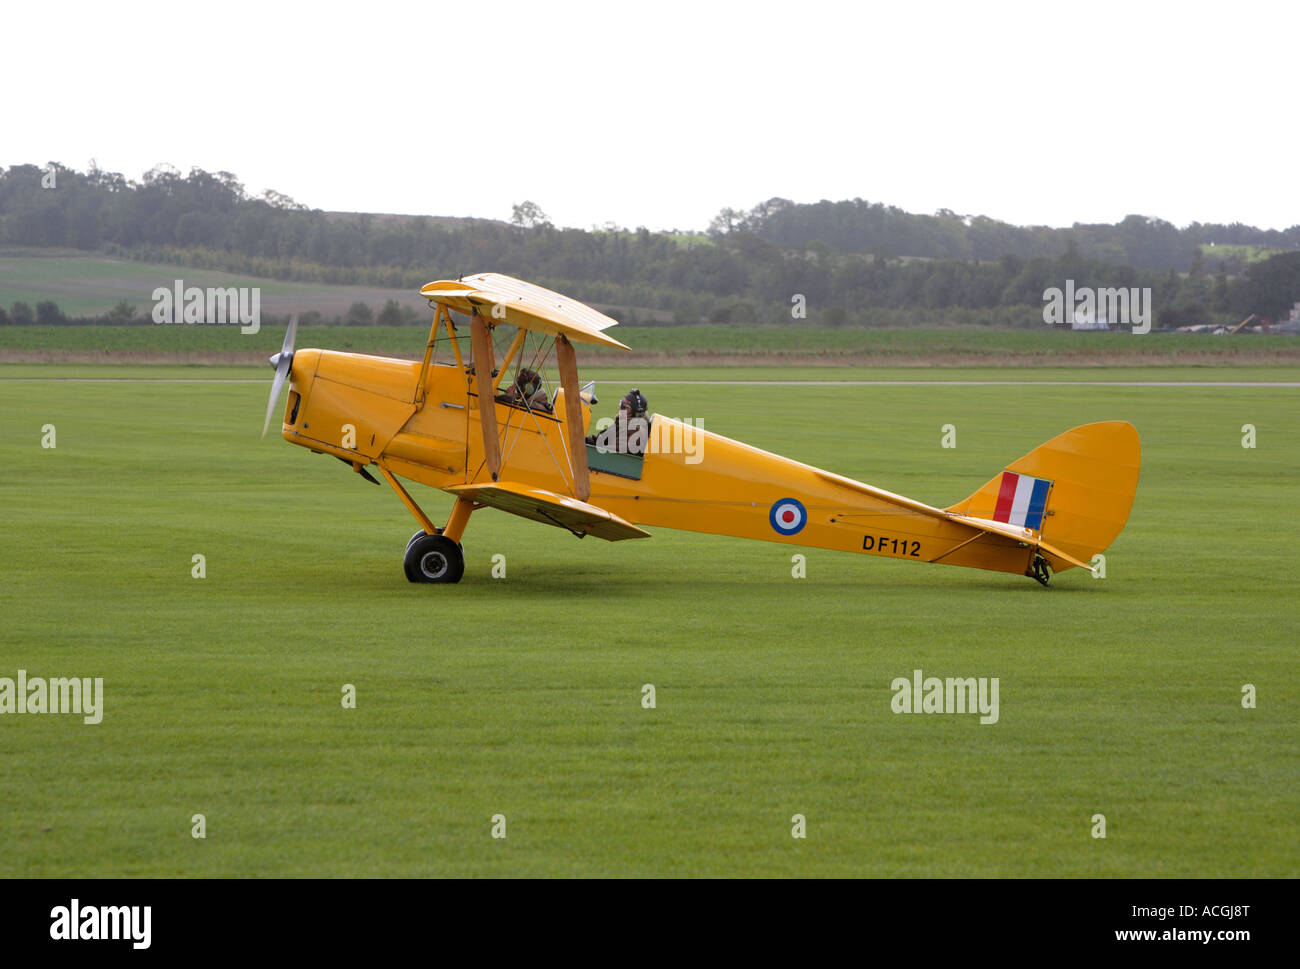 G ANRM DF112 De Havilland DH82A Tiger Moth with military markings, Duxford, UK October 2006 Stock Photo